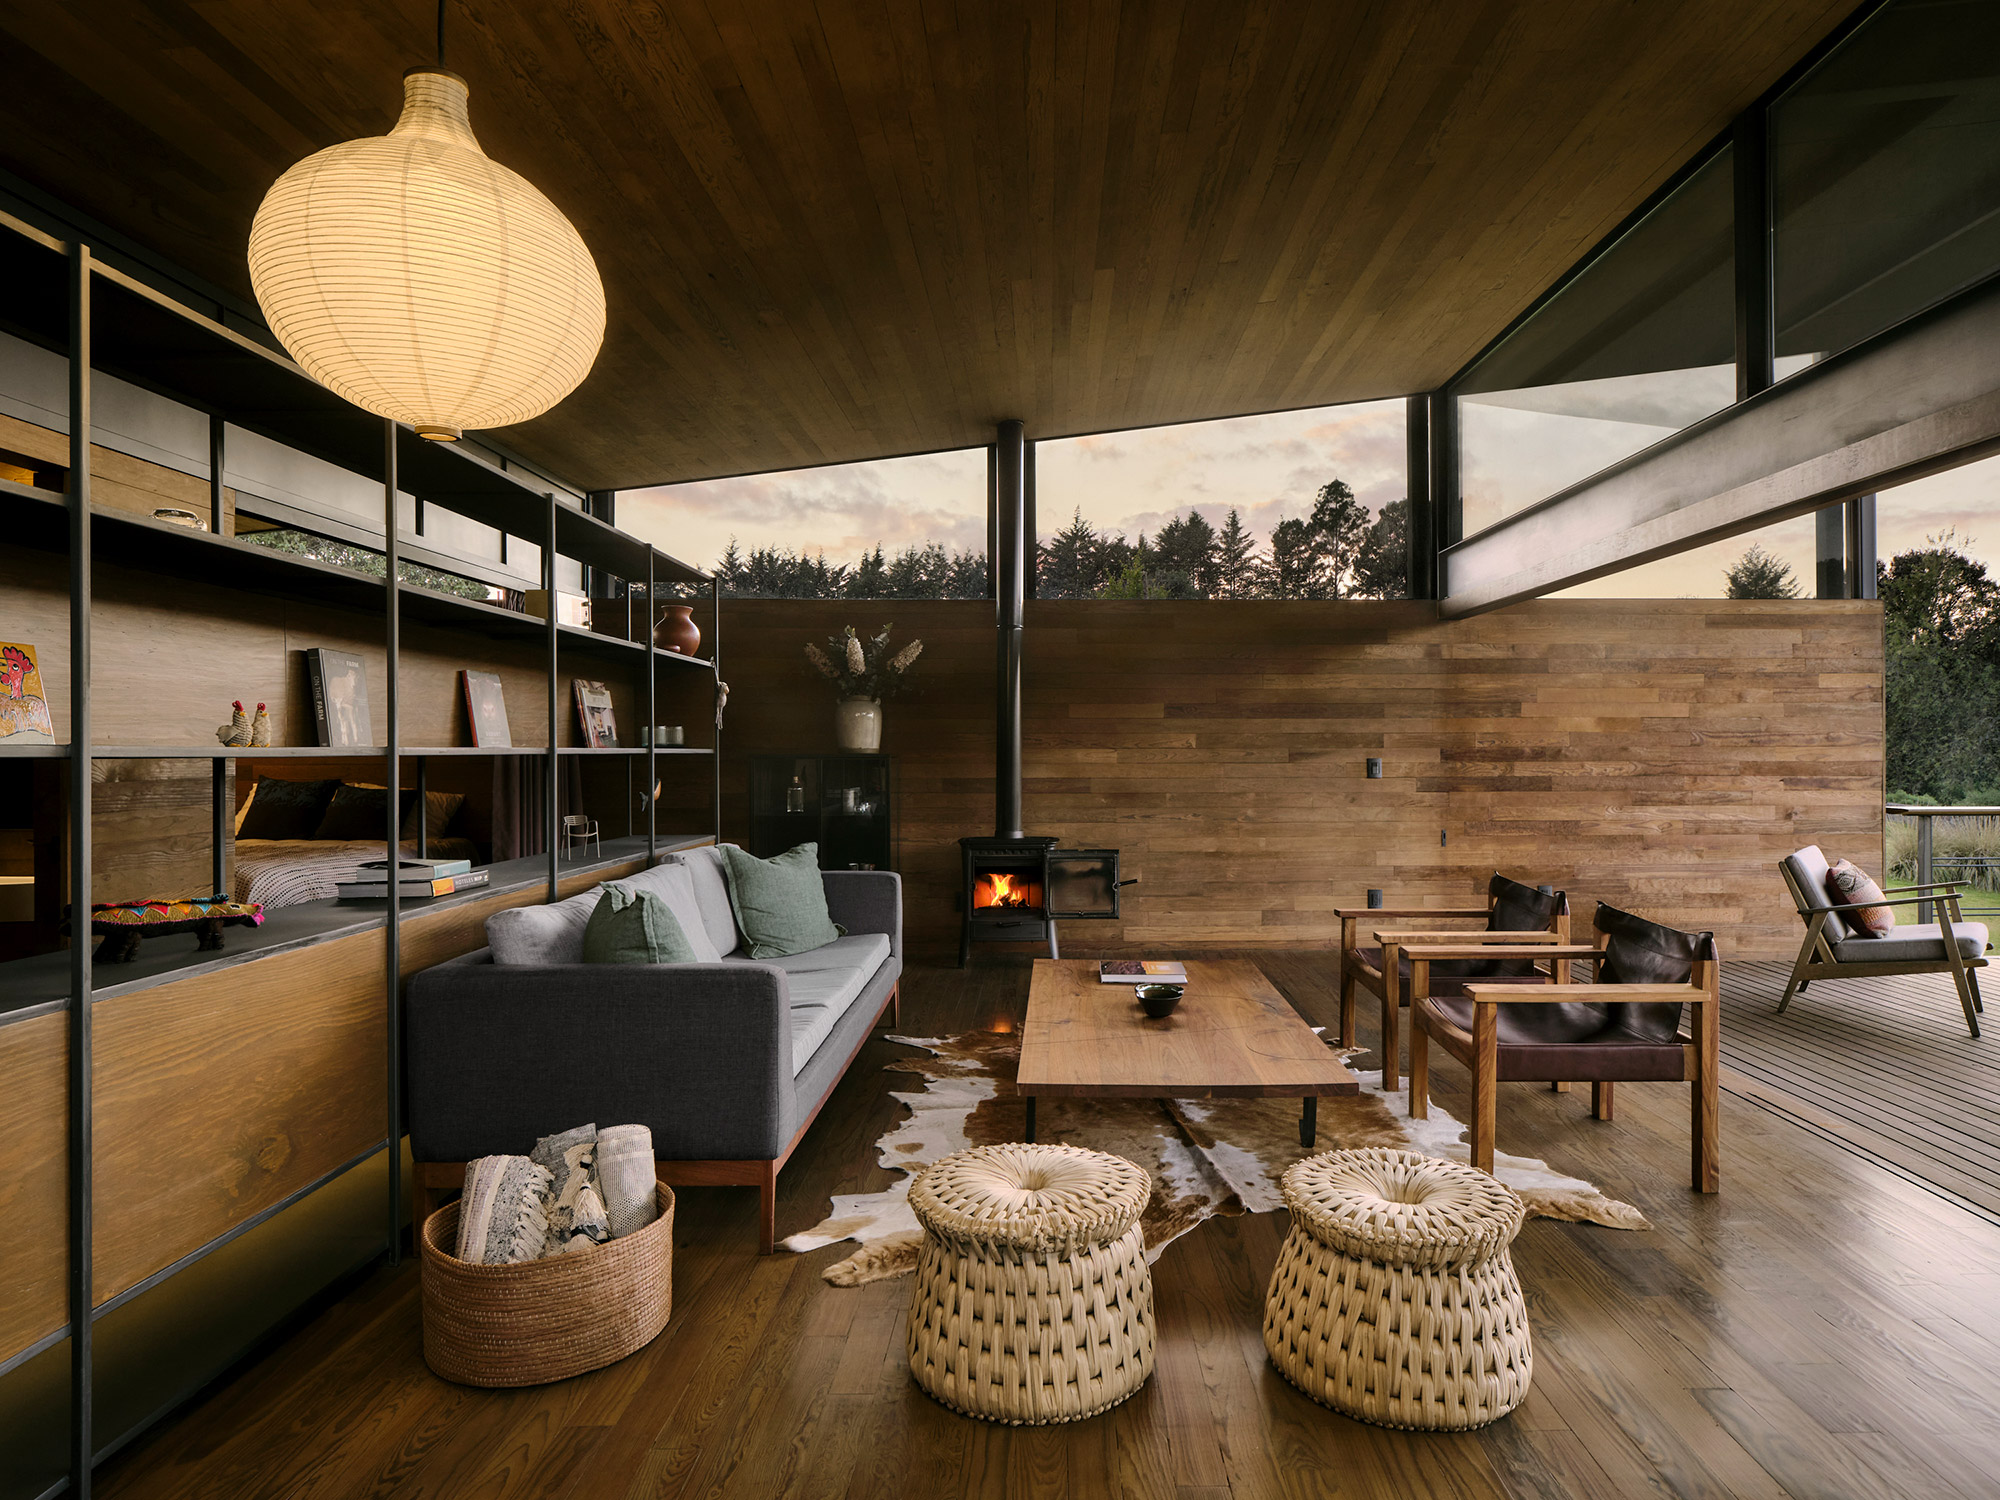 Weber Arquitectos’ Tiny House in Valle de Bravo: Sustainable Living thumbnail